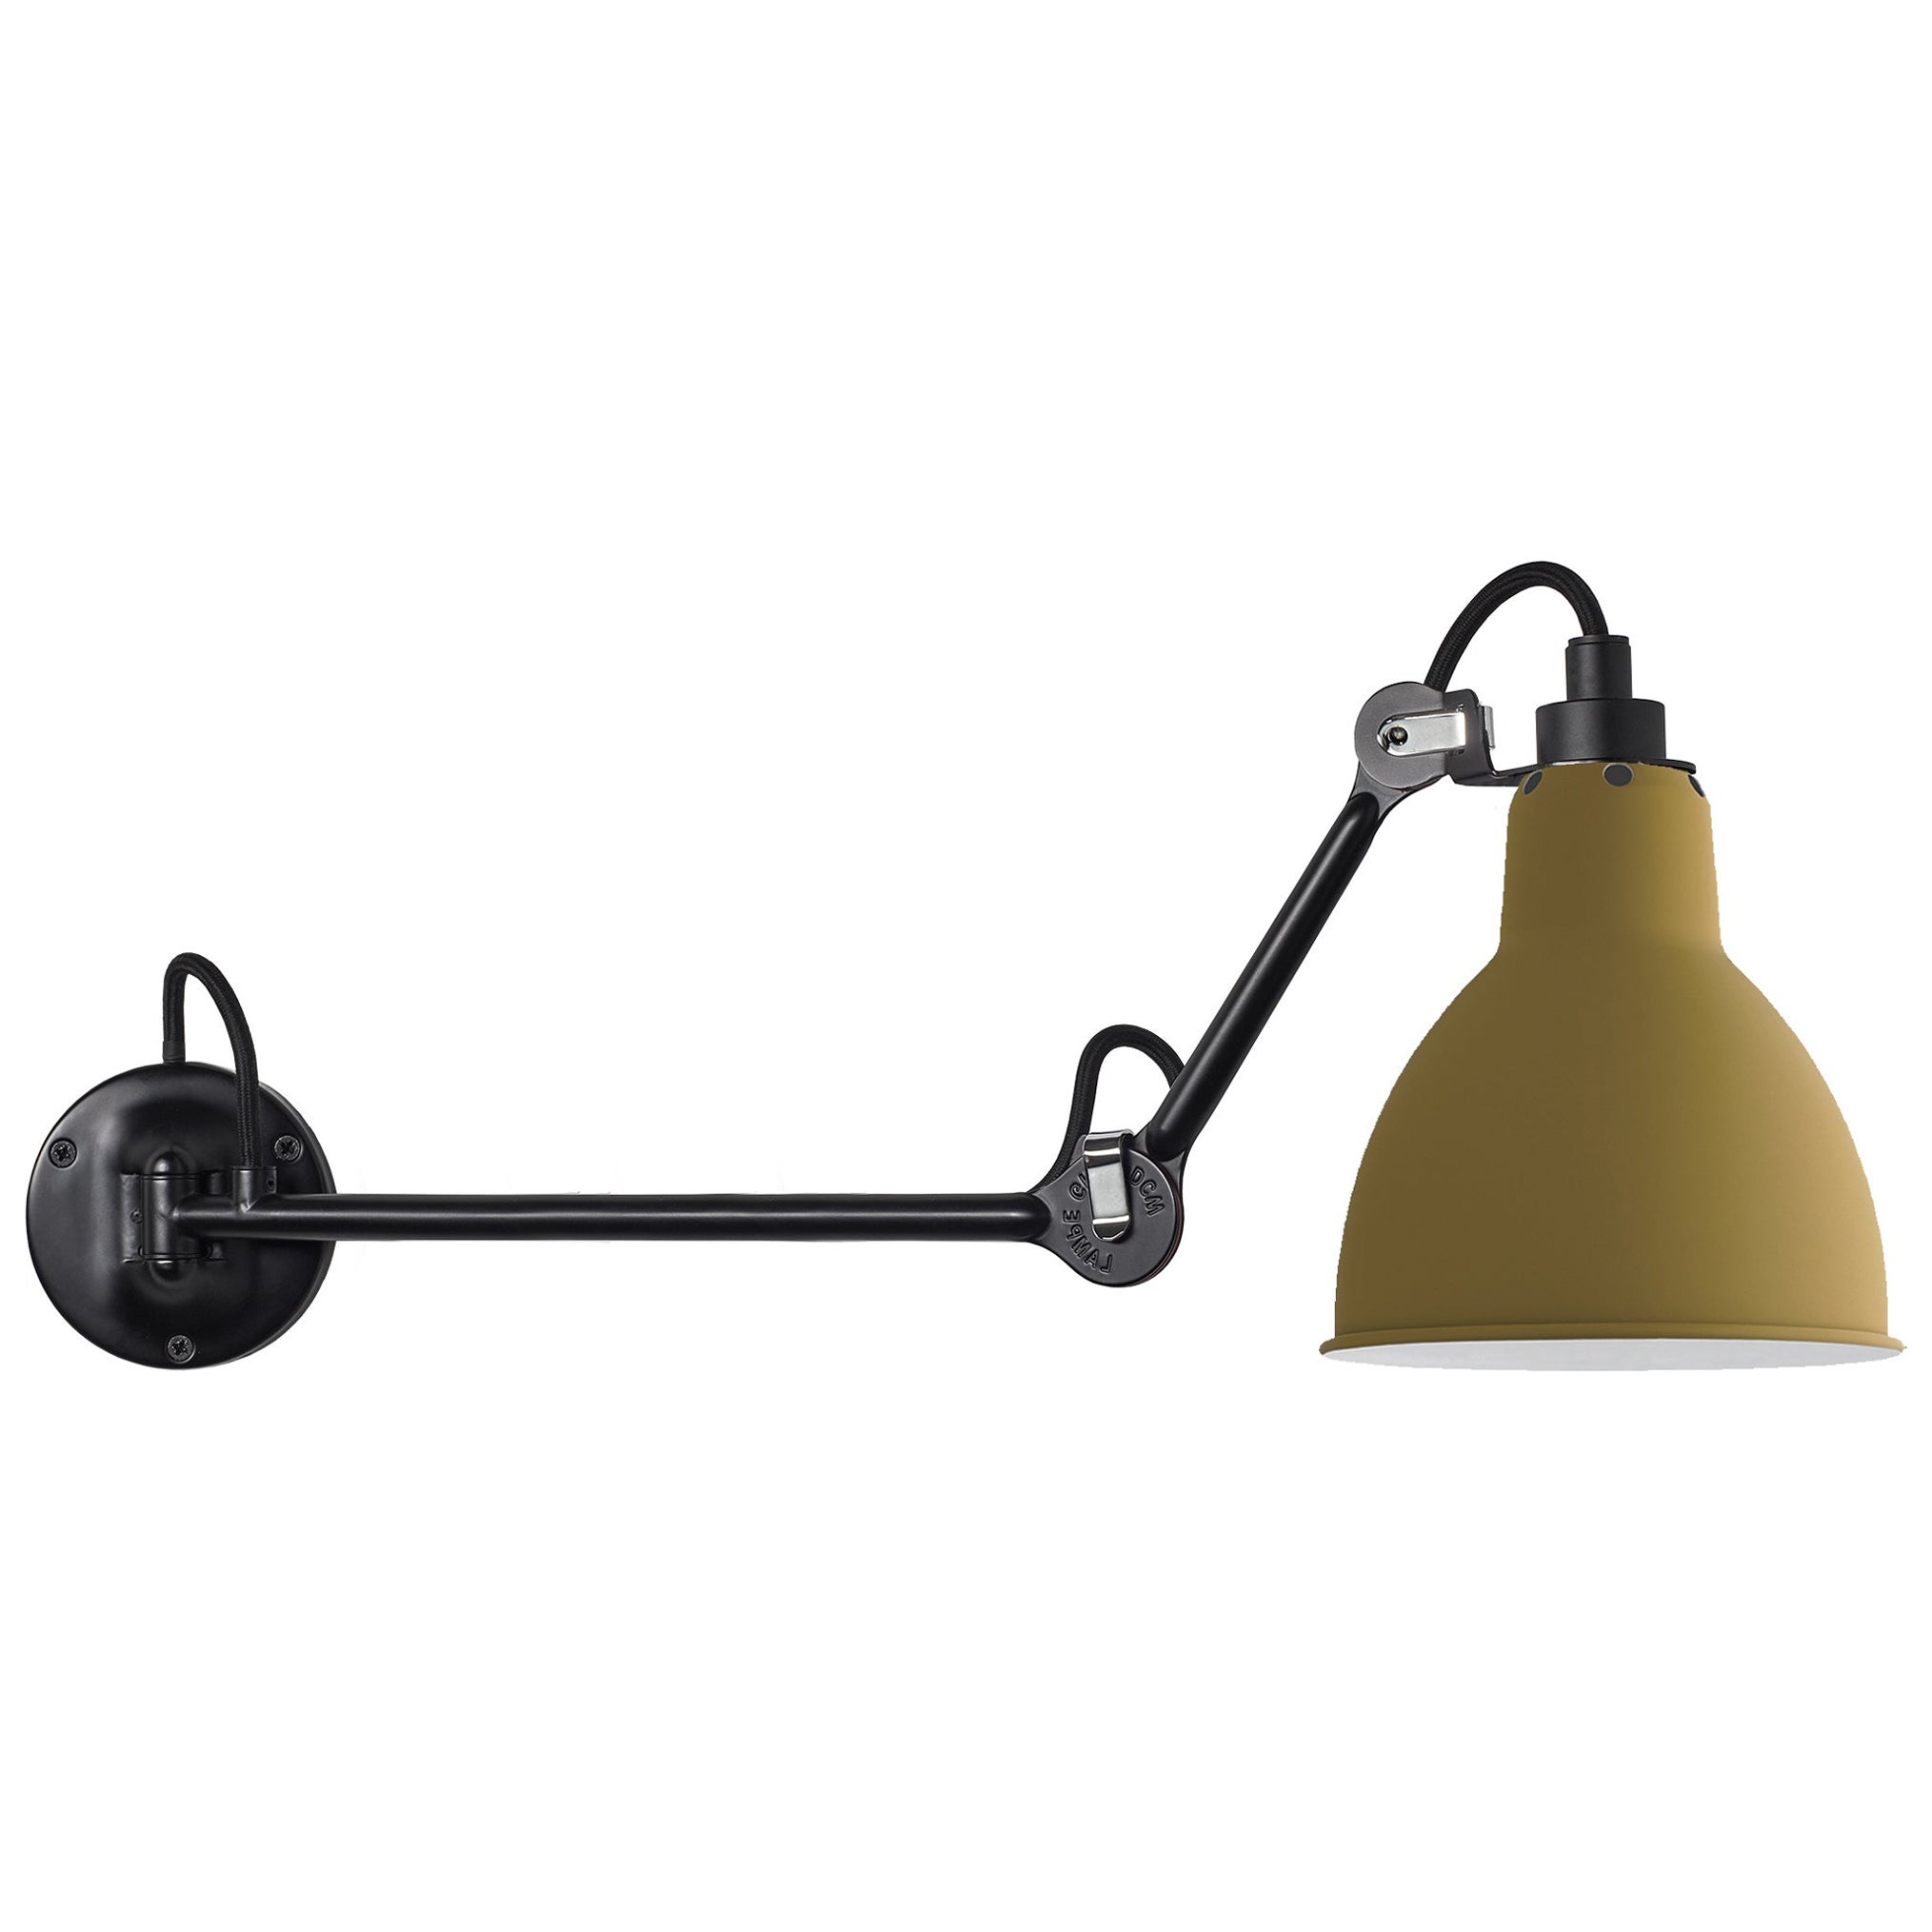 DCW Editions La Lampe Gras N°204 L40 Wall Lamp in Black Steel Arm & Yellow Shade For Sale